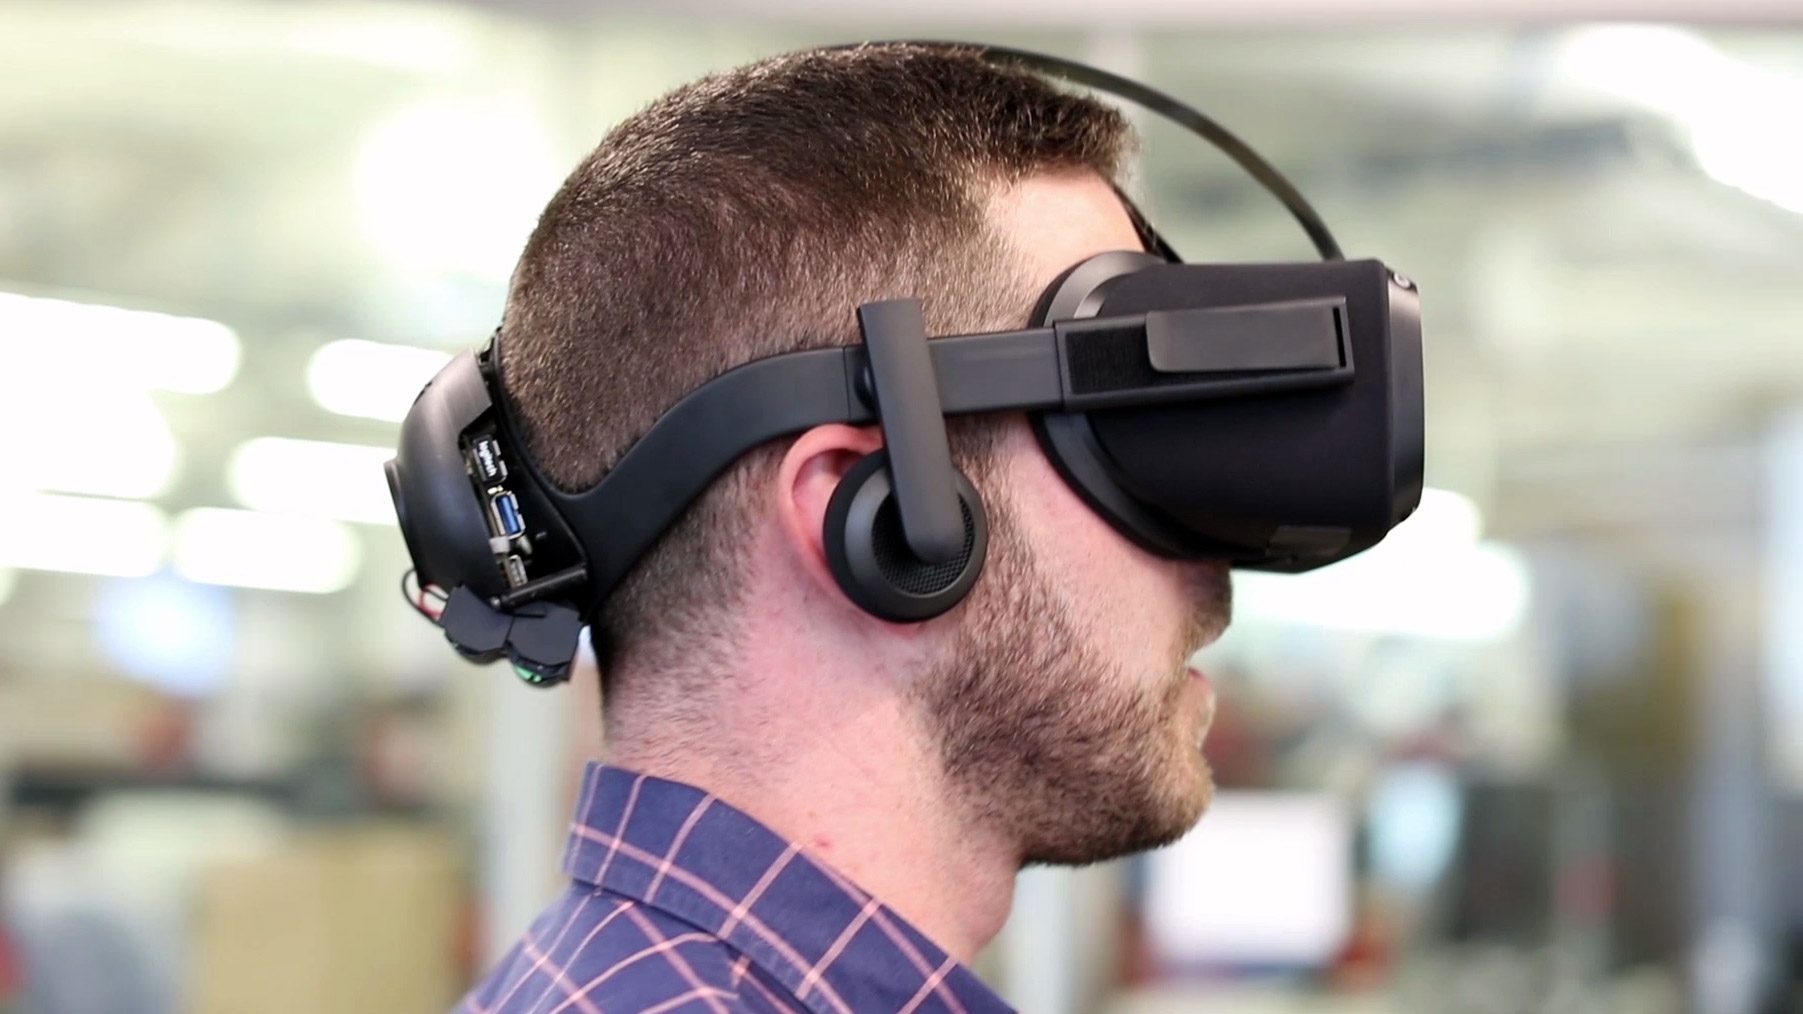 Oculus: Rift Won't Be Superseded by New Version 'at two years' – Road to